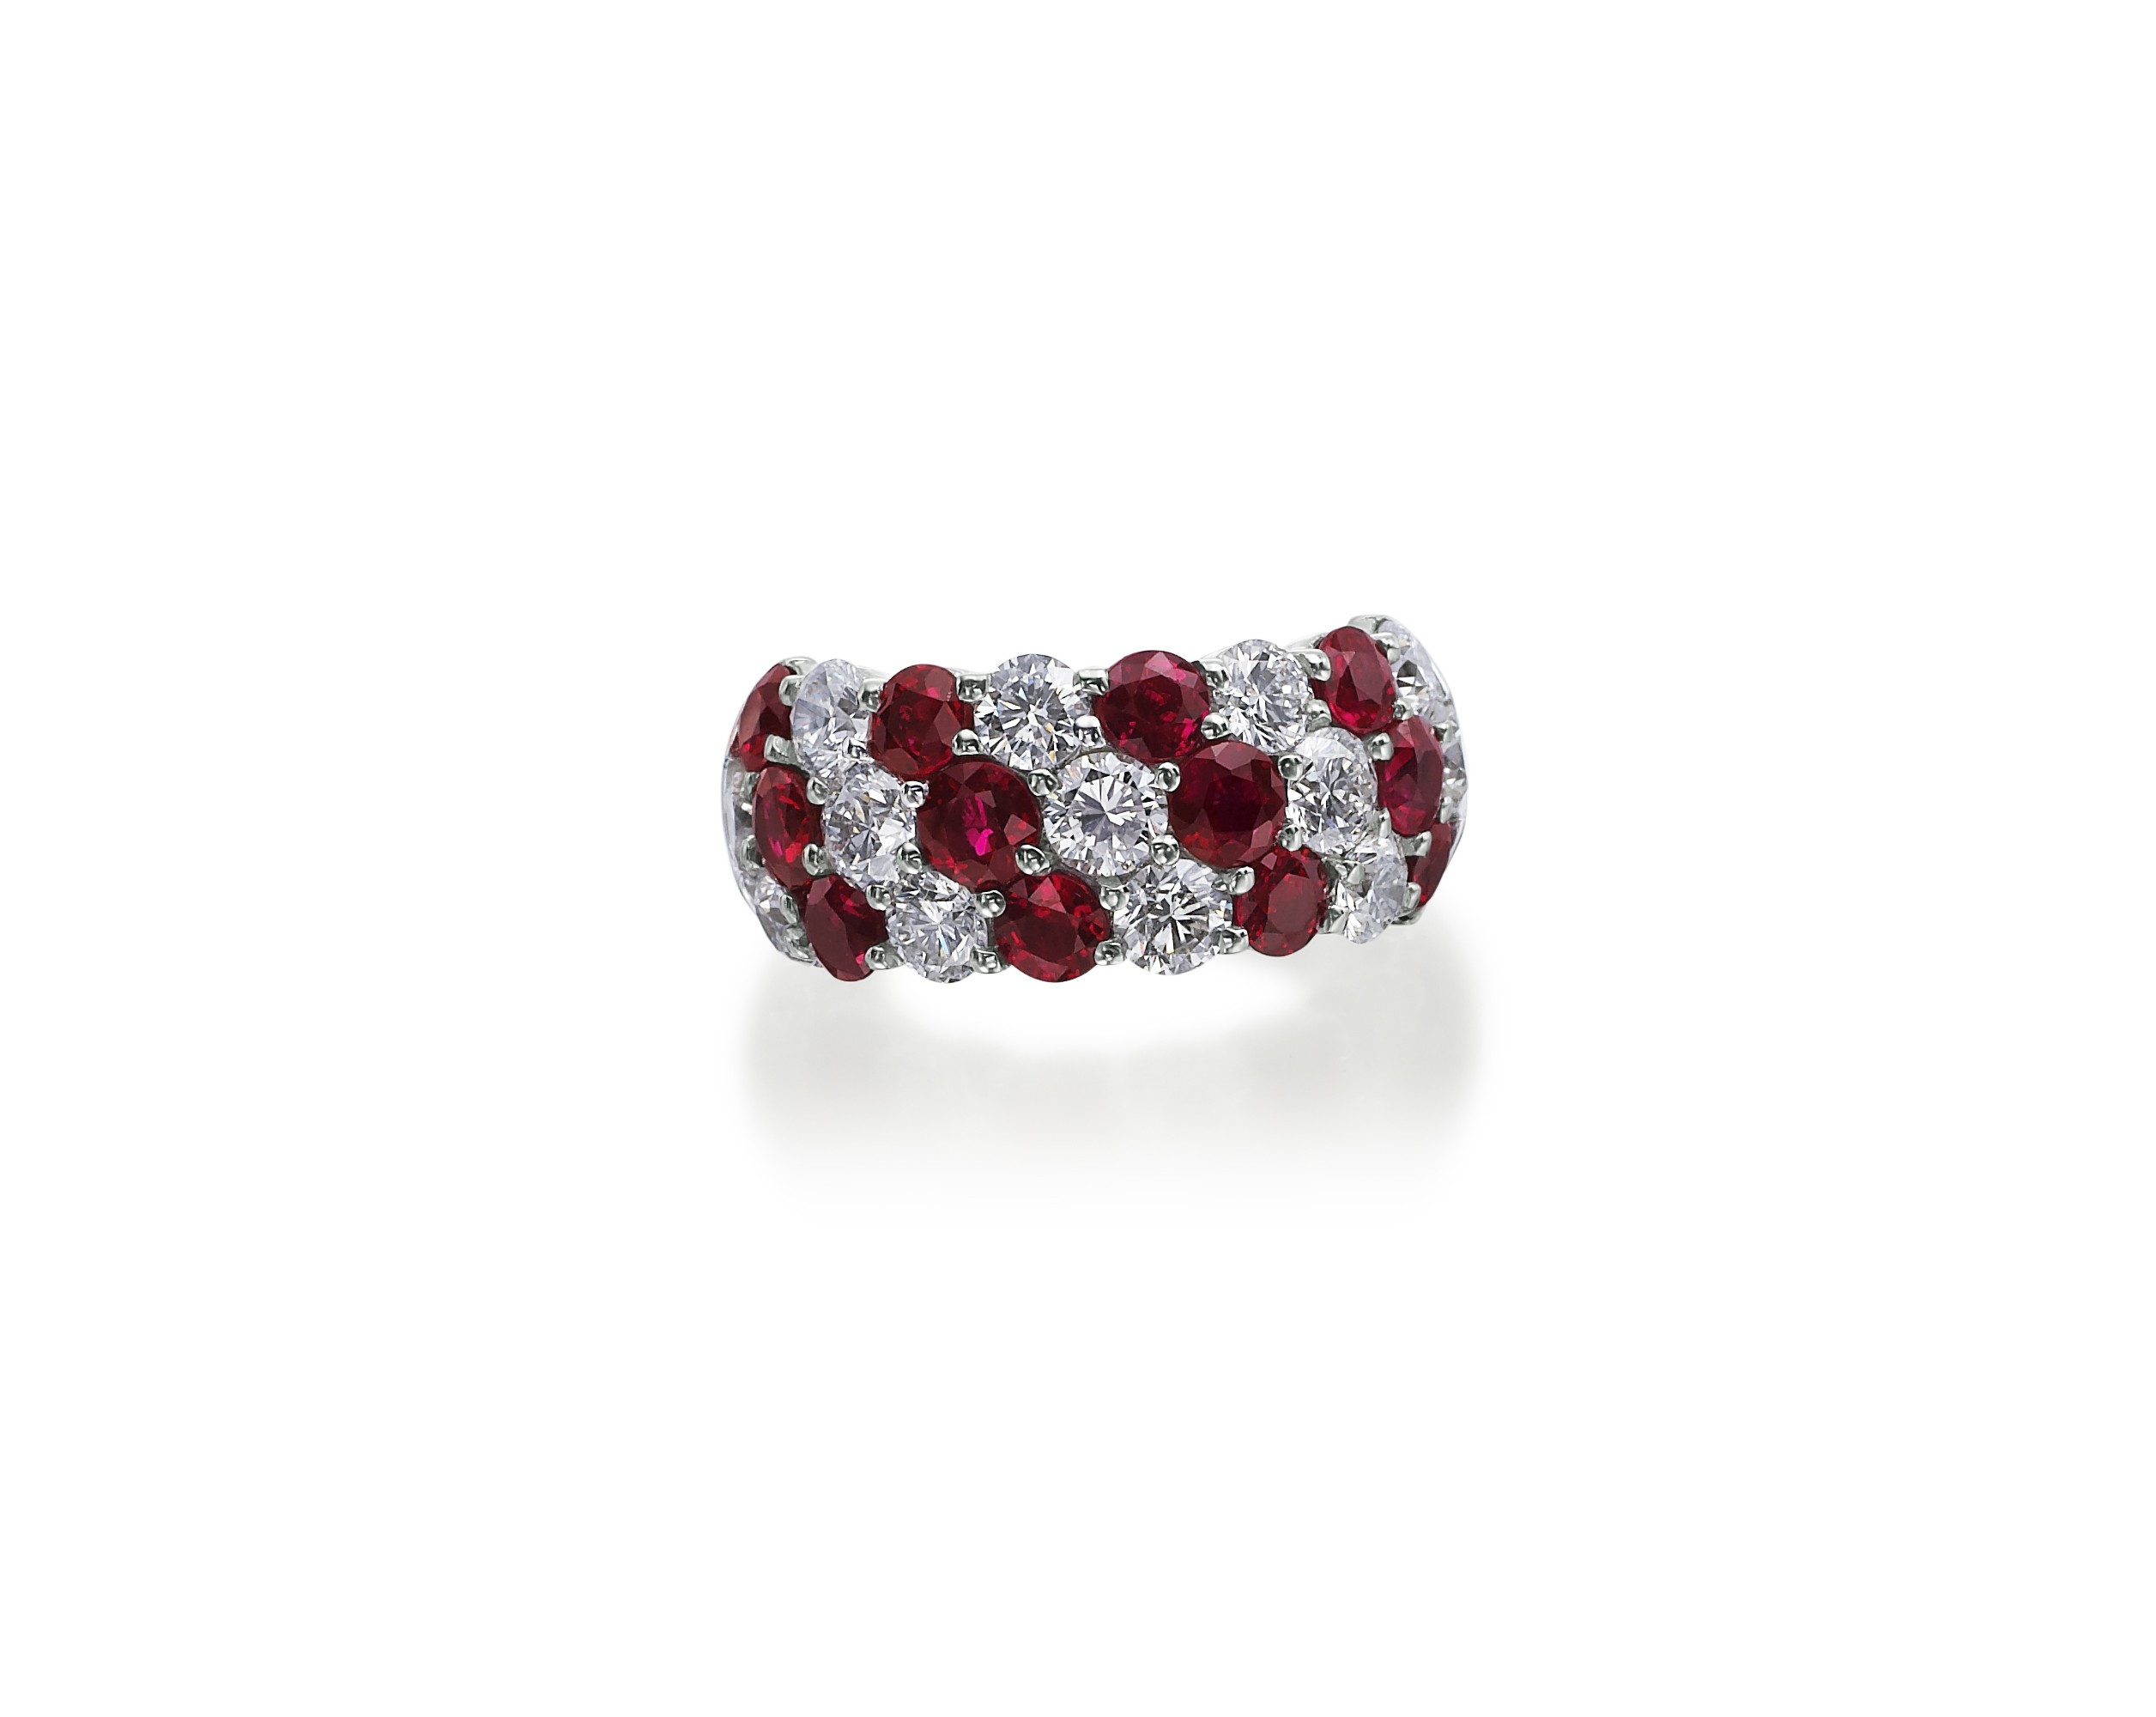 Ruby and diamond ring in Palm Desert on El Paseo